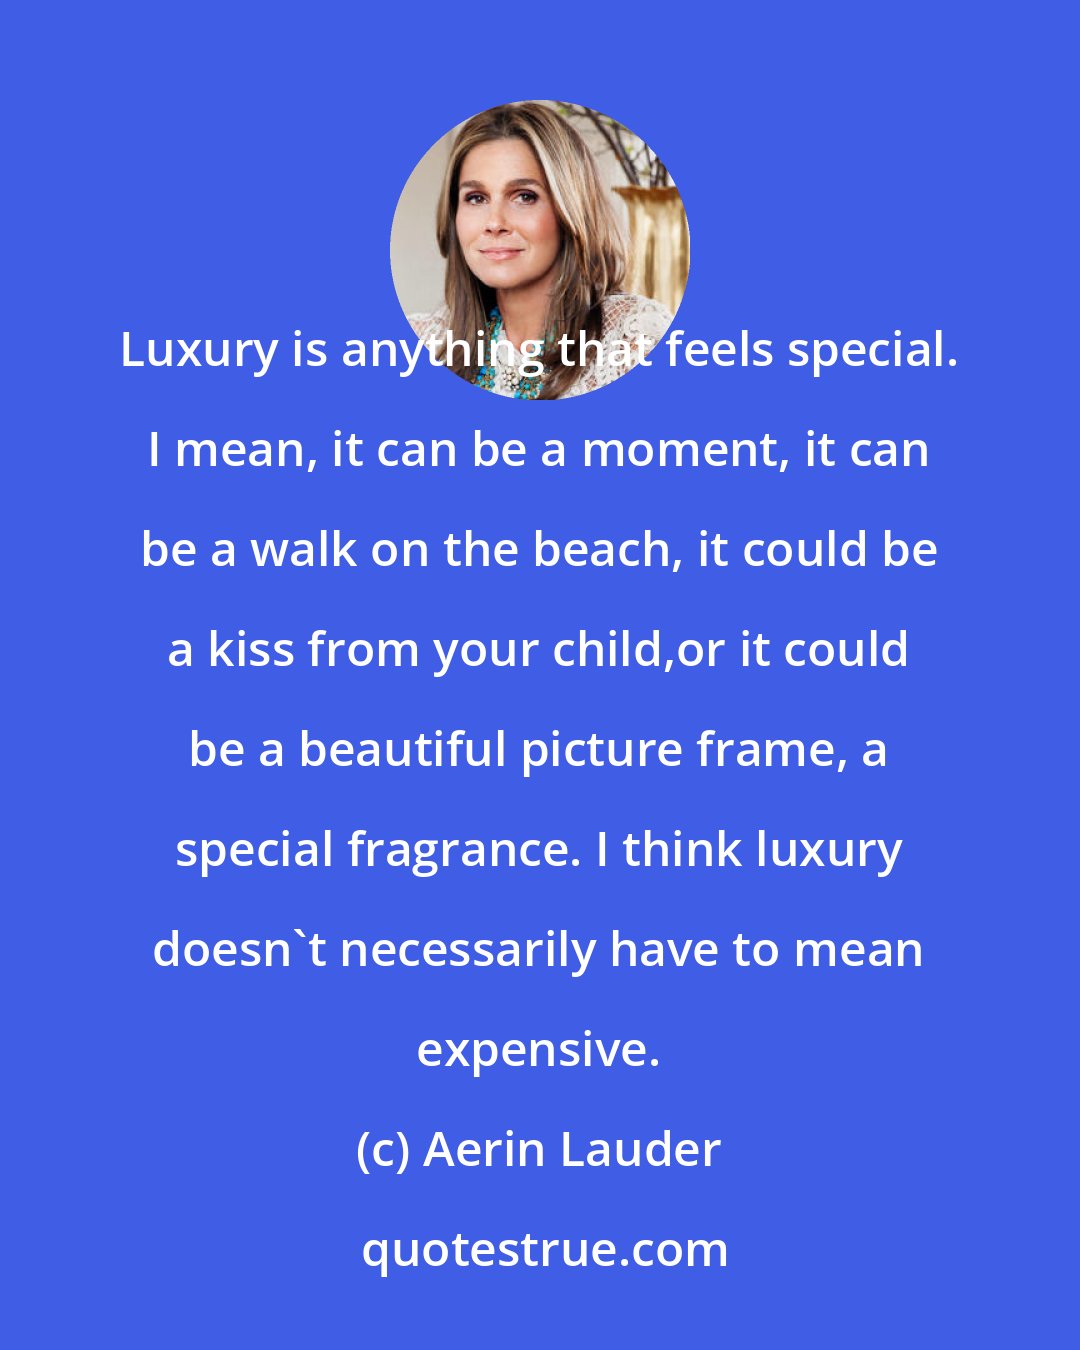 Aerin Lauder: Luxury is anything that feels special. I mean, it can be a moment, it can be a walk on the beach, it could be a kiss from your child,or it could be a beautiful picture frame, a special fragrance. I think luxury doesn't necessarily have to mean expensive.